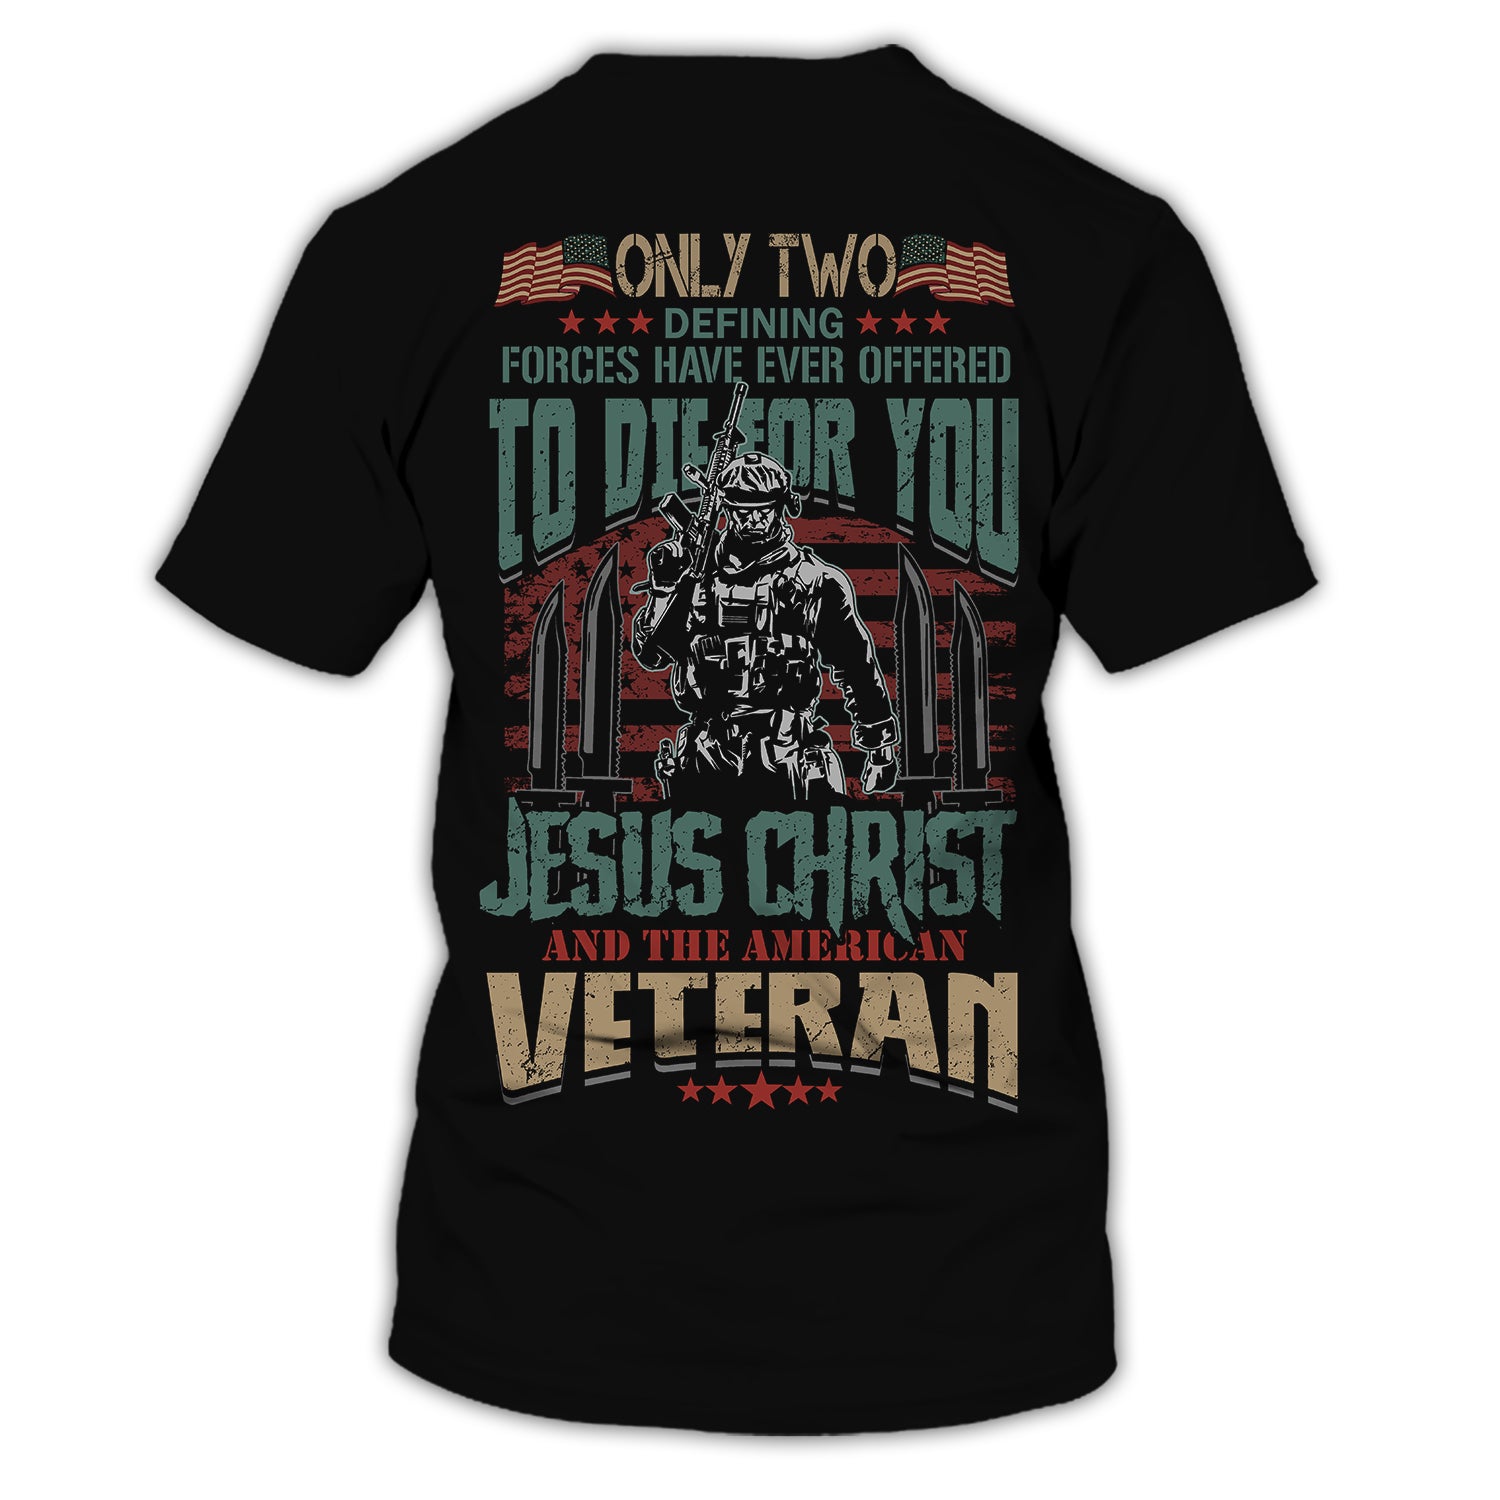 Only Two, Defening Forces Have Ever Offered To Die For You - Jesus Christ And American Veteran - Personalized Veteran T-Shirt, Gift For Veterans